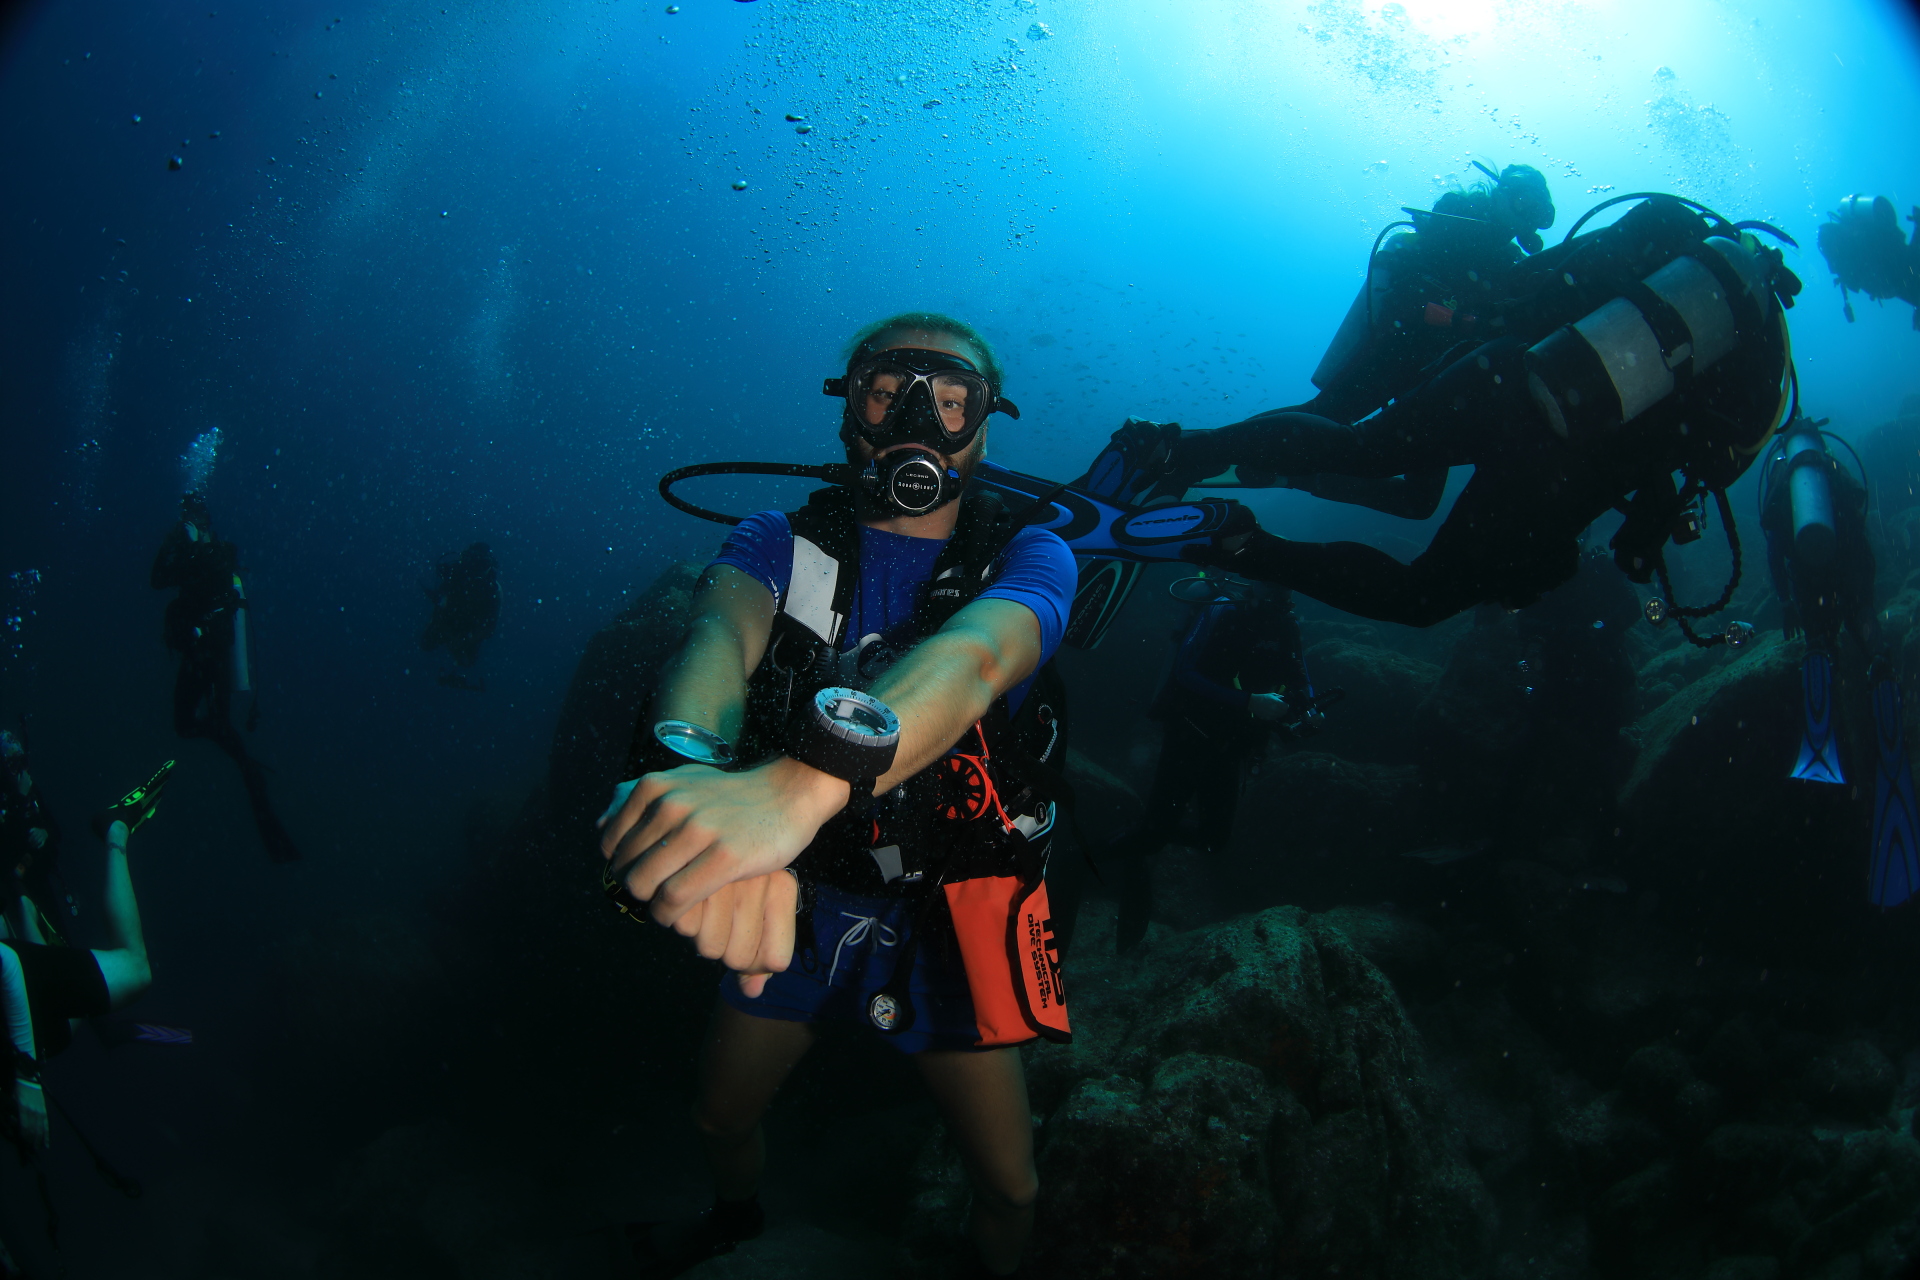 Paco - Our Other Dive Guide (Nov 19, 2021)